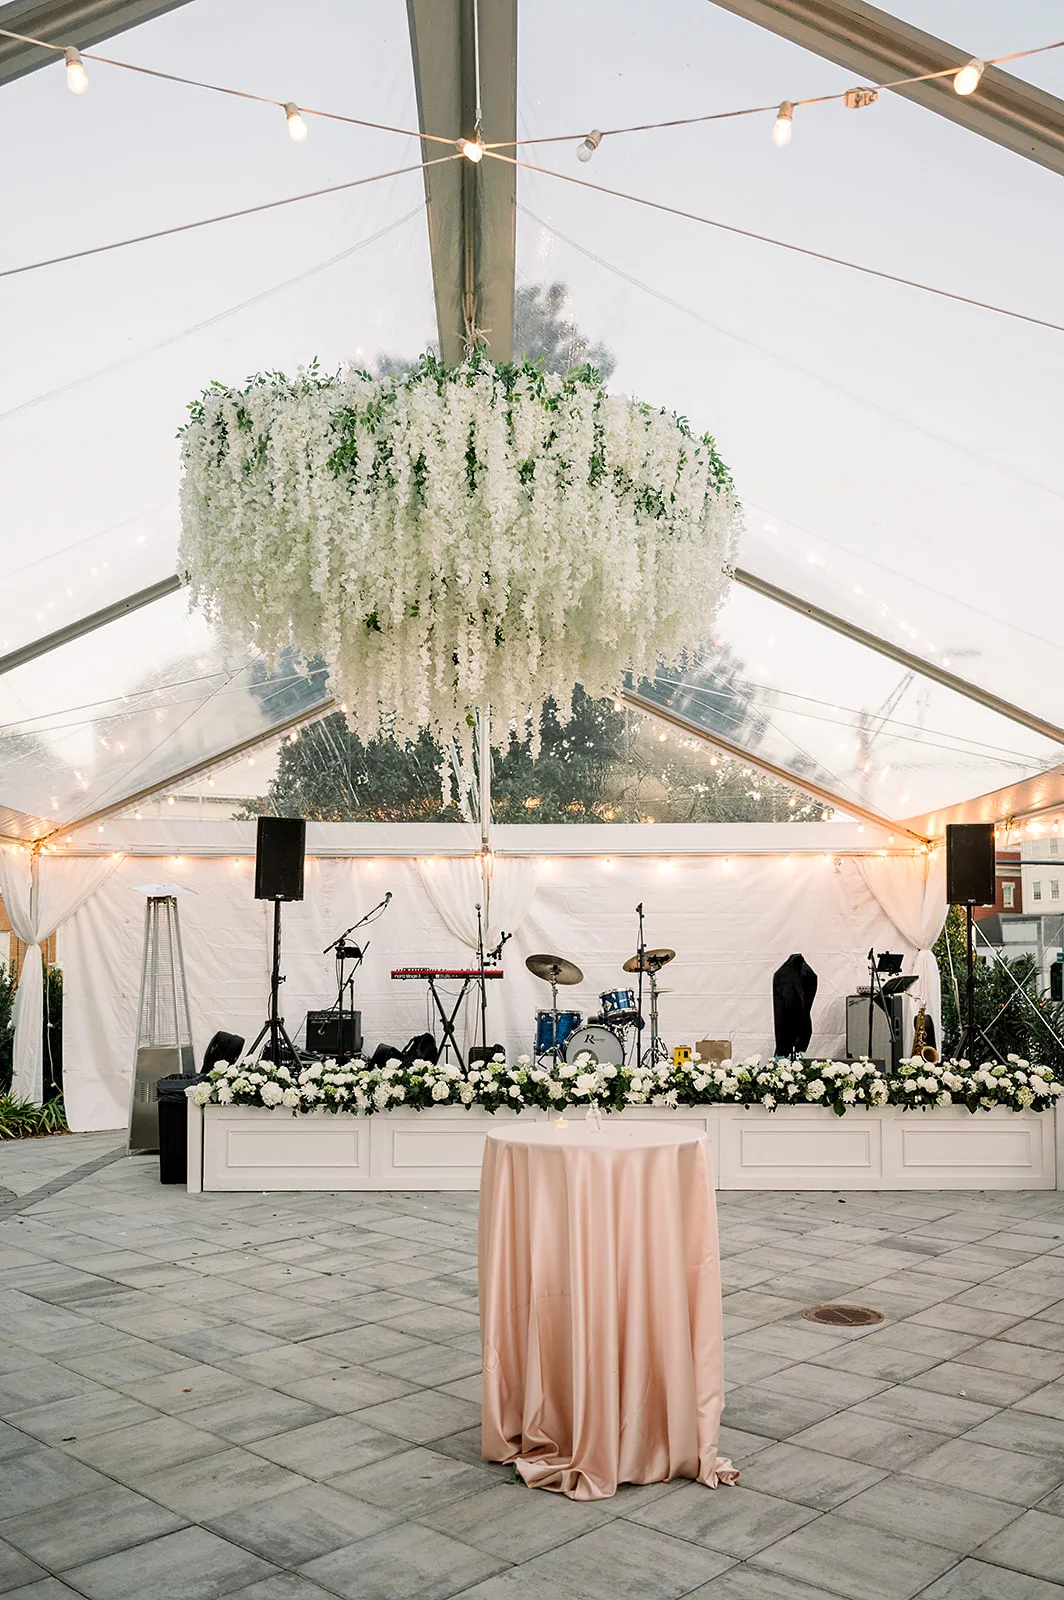 Details of a wedding reception band set up under a clear roof tent